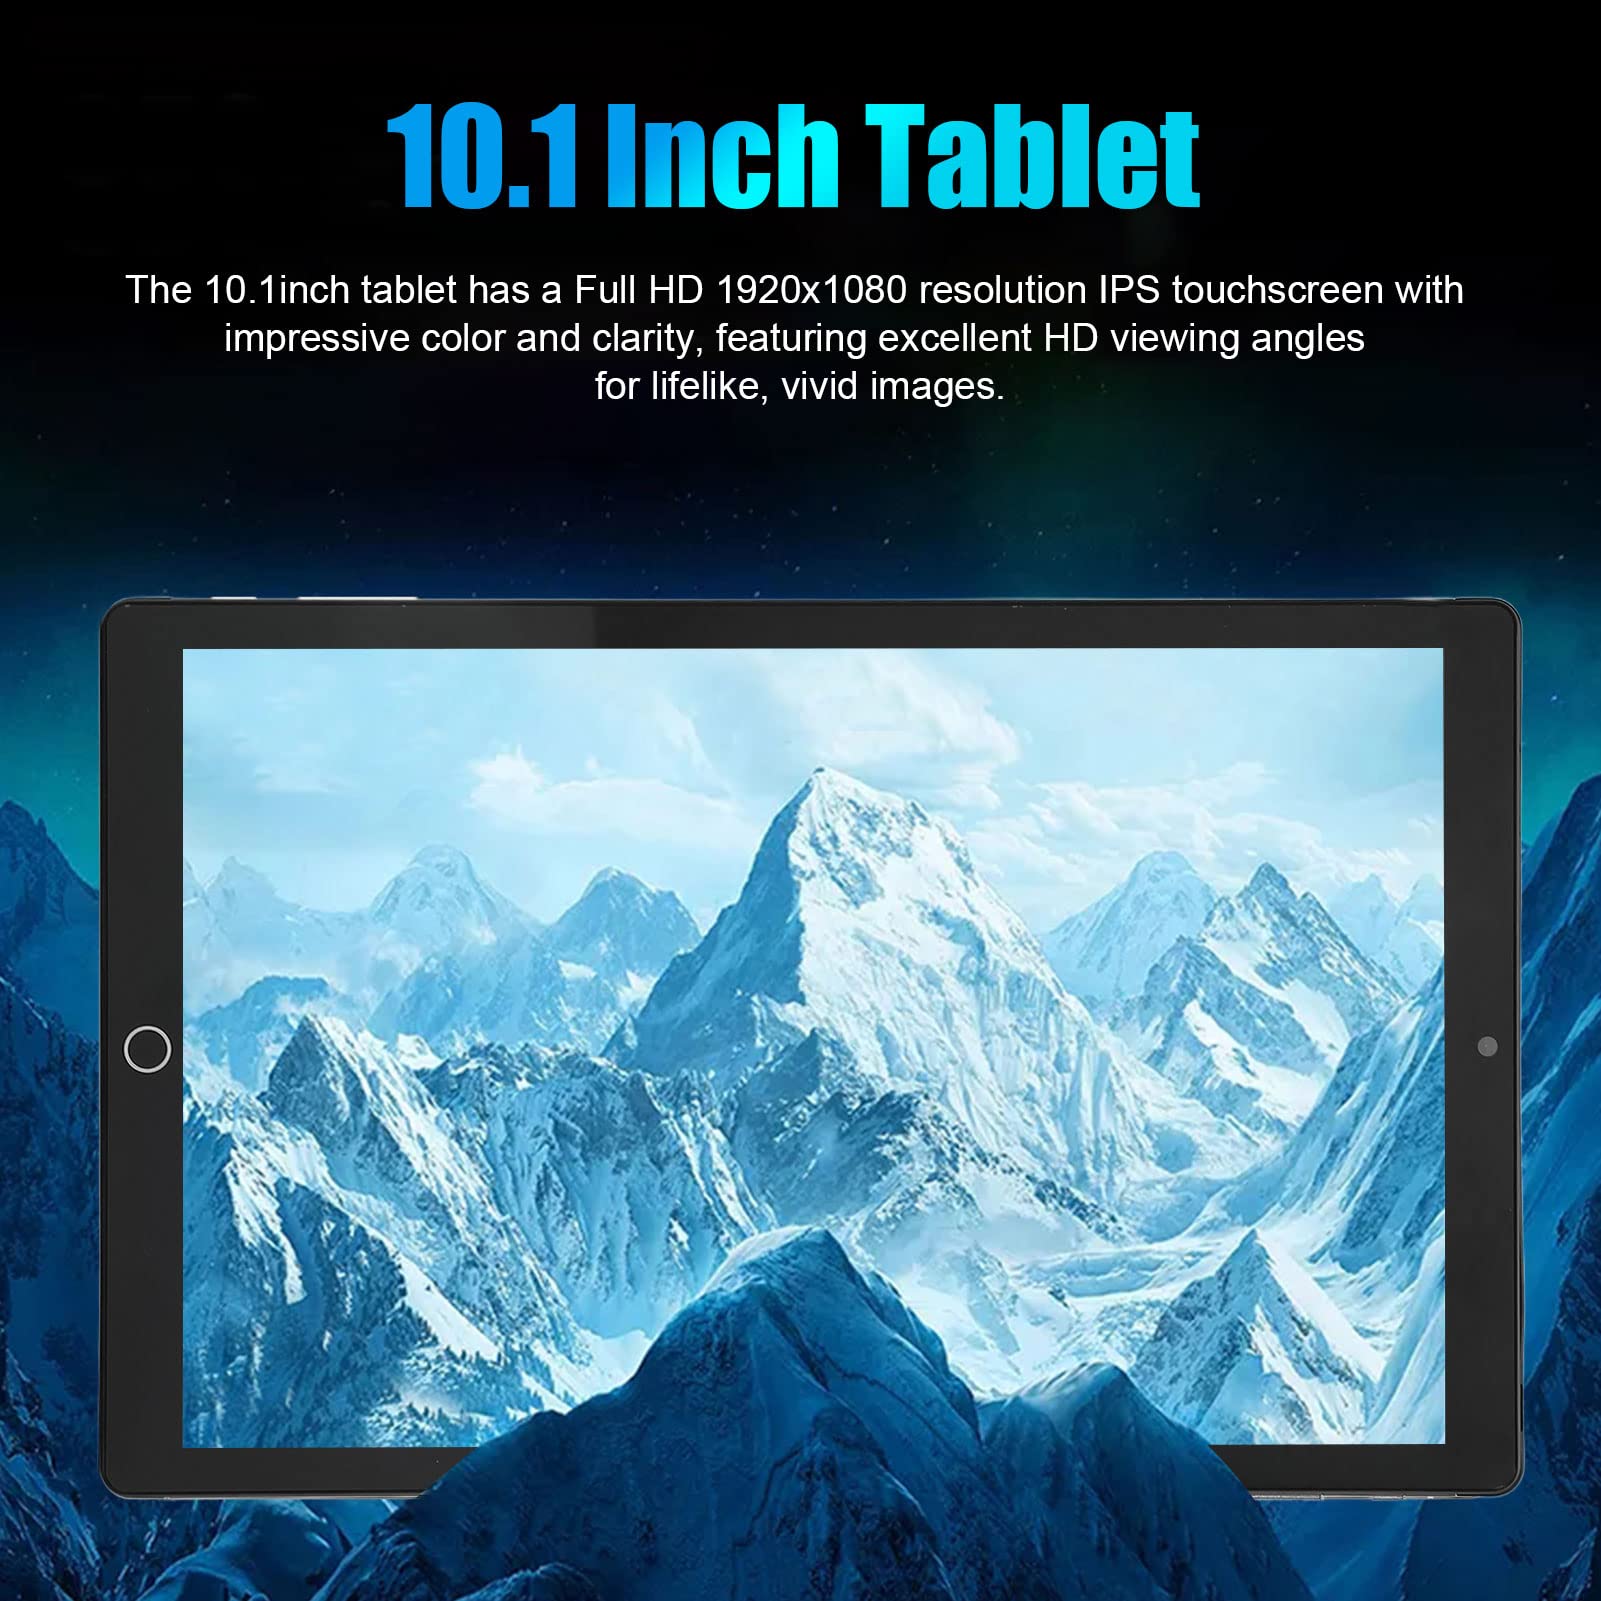 Tablet 10.1 Inch, 2.4G 5G WiFi Tablet and Phone, 6G RAM 128G ROM, 1920x1080 IPS HD Touchscreen, 5MP 13M Camers, PMT6753 Octa Core, Dual Careds, BT, AM, FM, GPS, 6000mAh